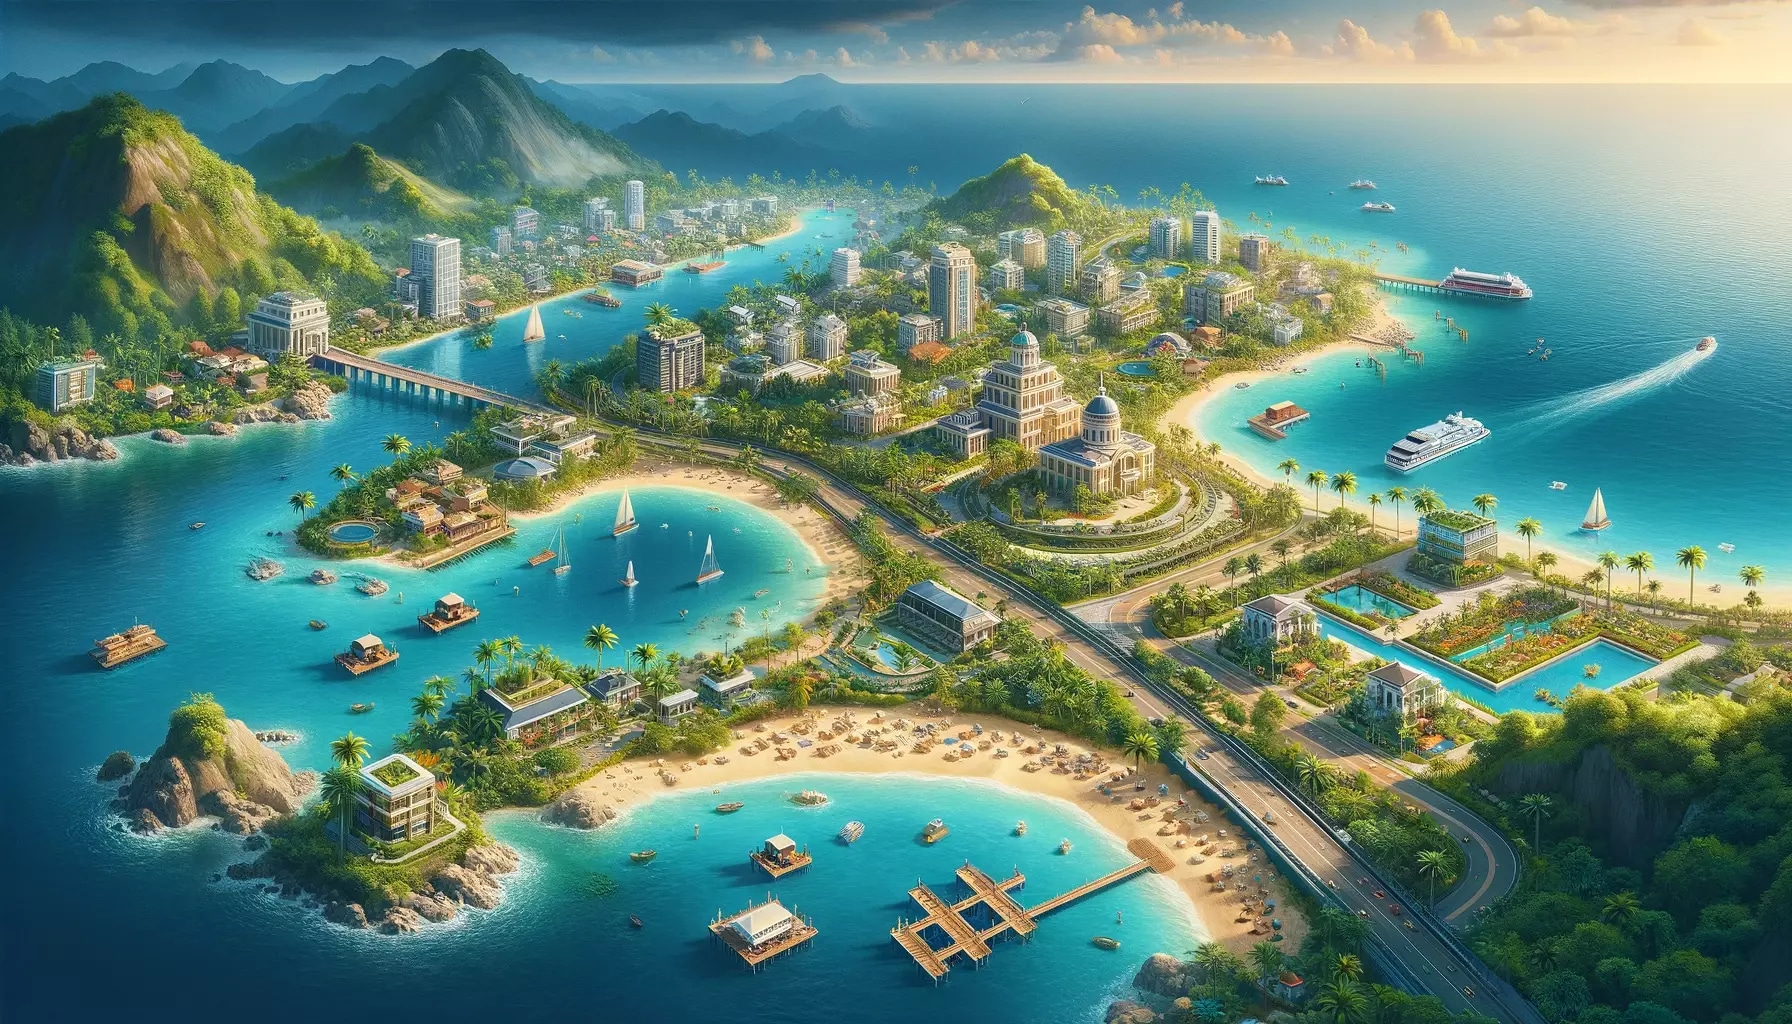 Tropico Fan? You'll Love These 5 Games that Capture the Island..